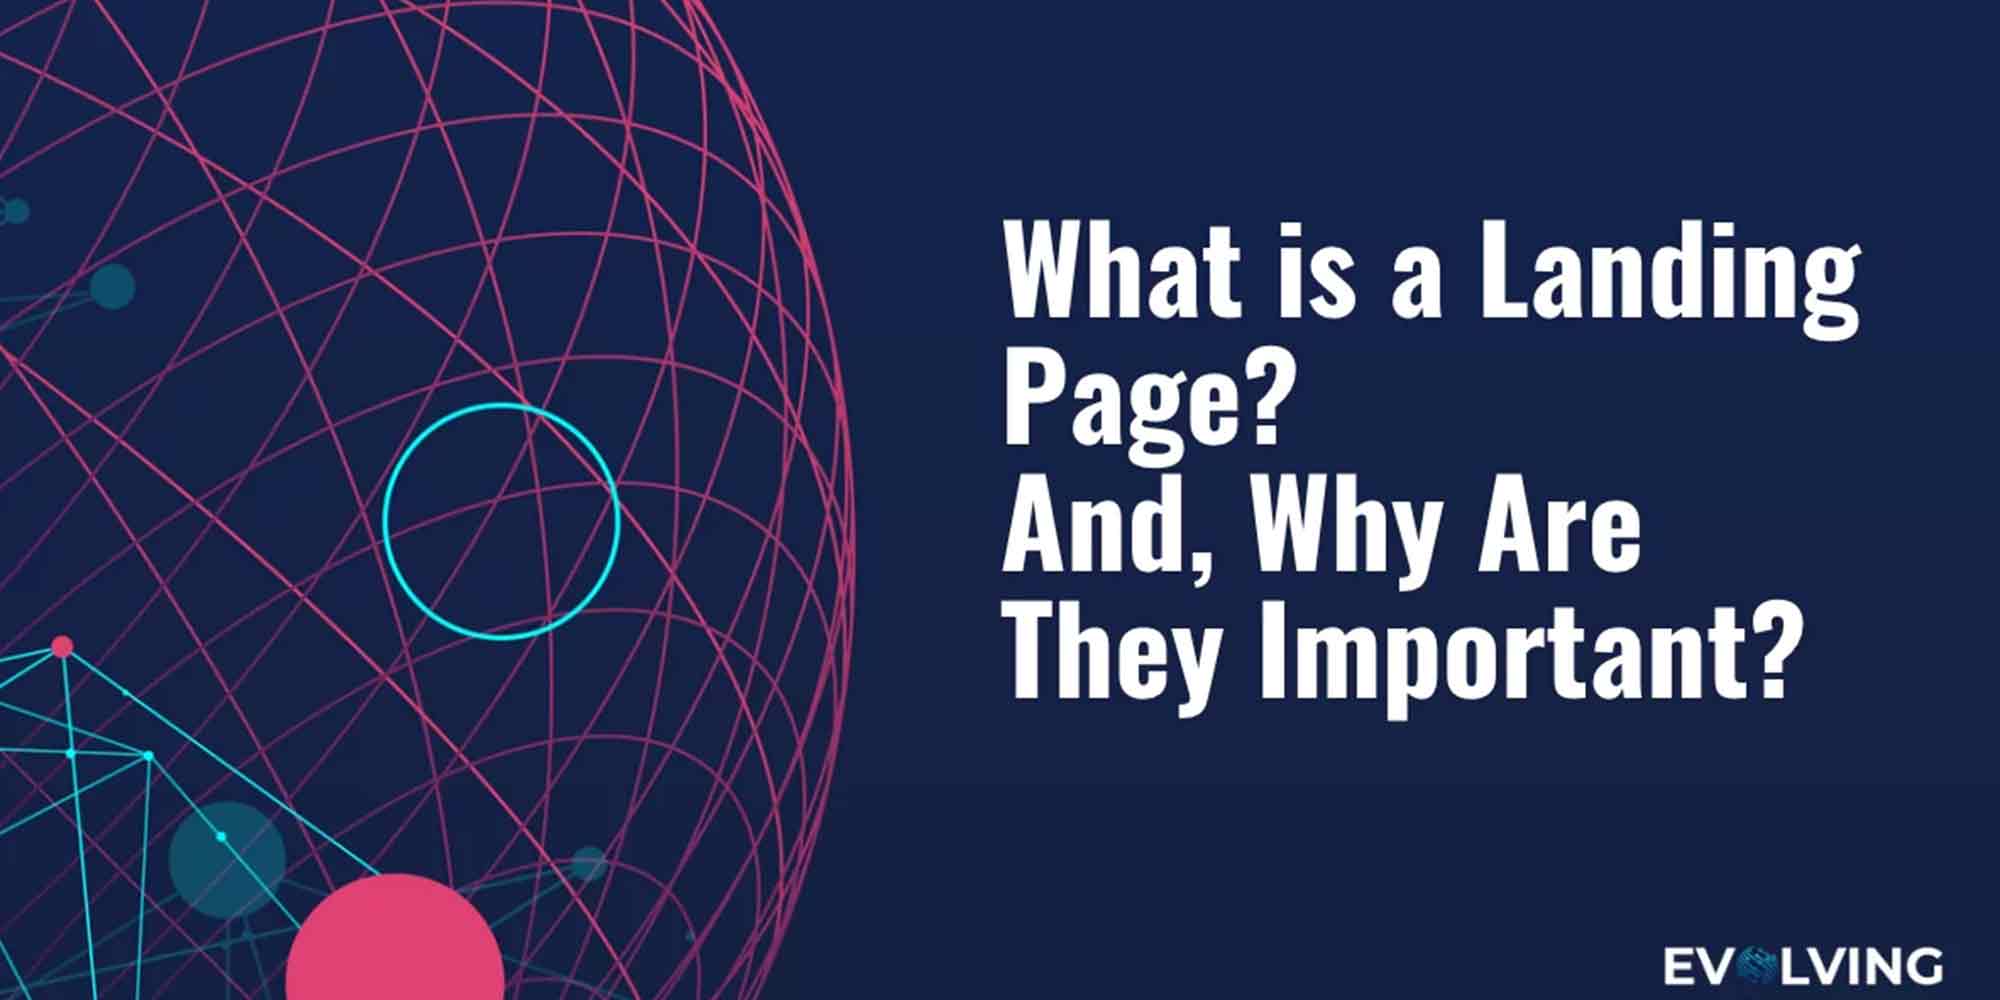 Blog Post: What is a landing page?